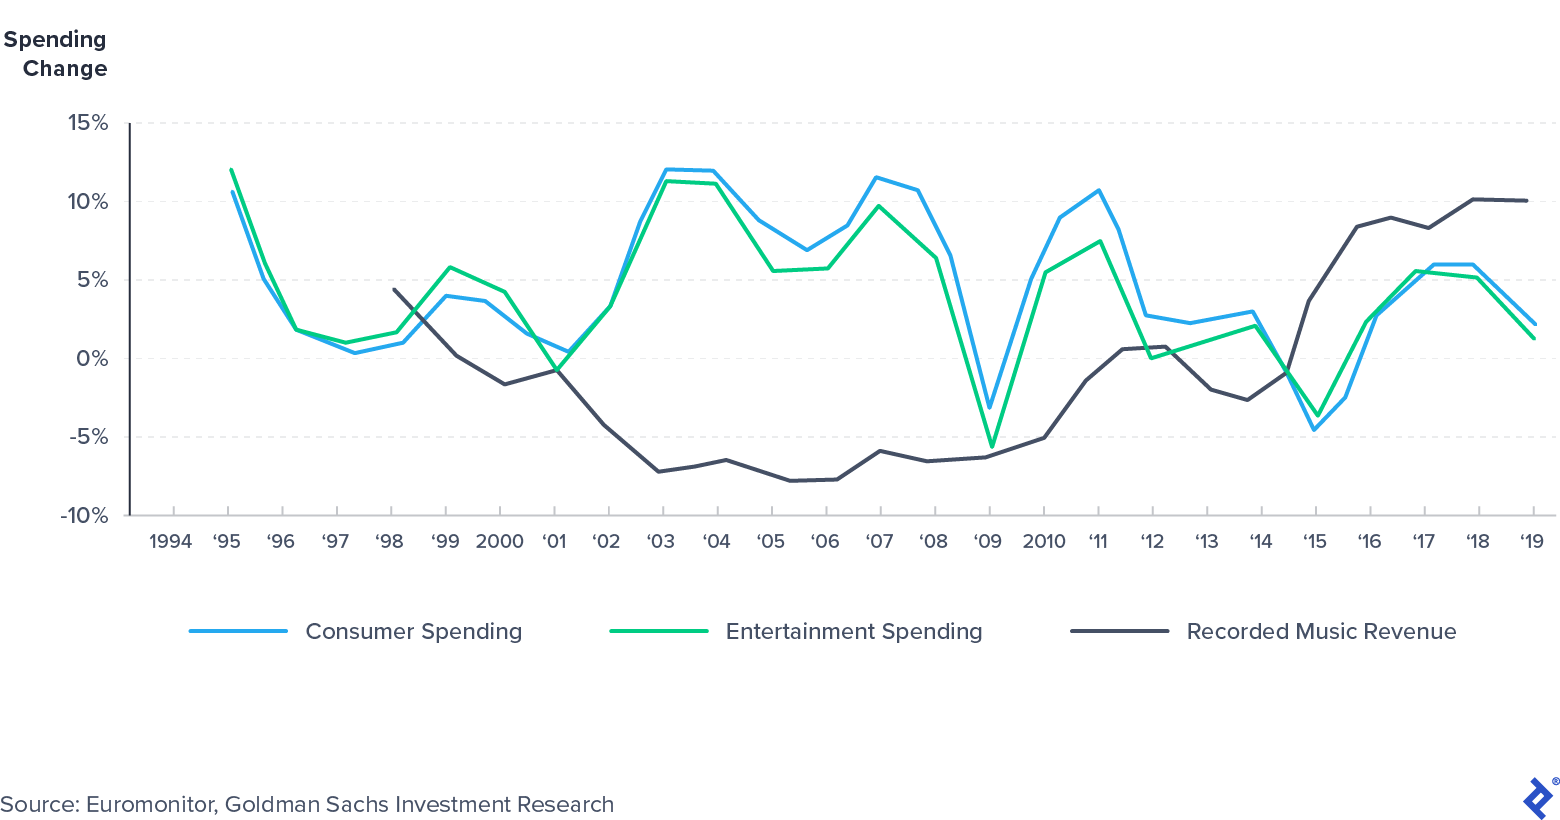 Recorded music spend has shown low correlation with personal consumer expenditures (PCE).